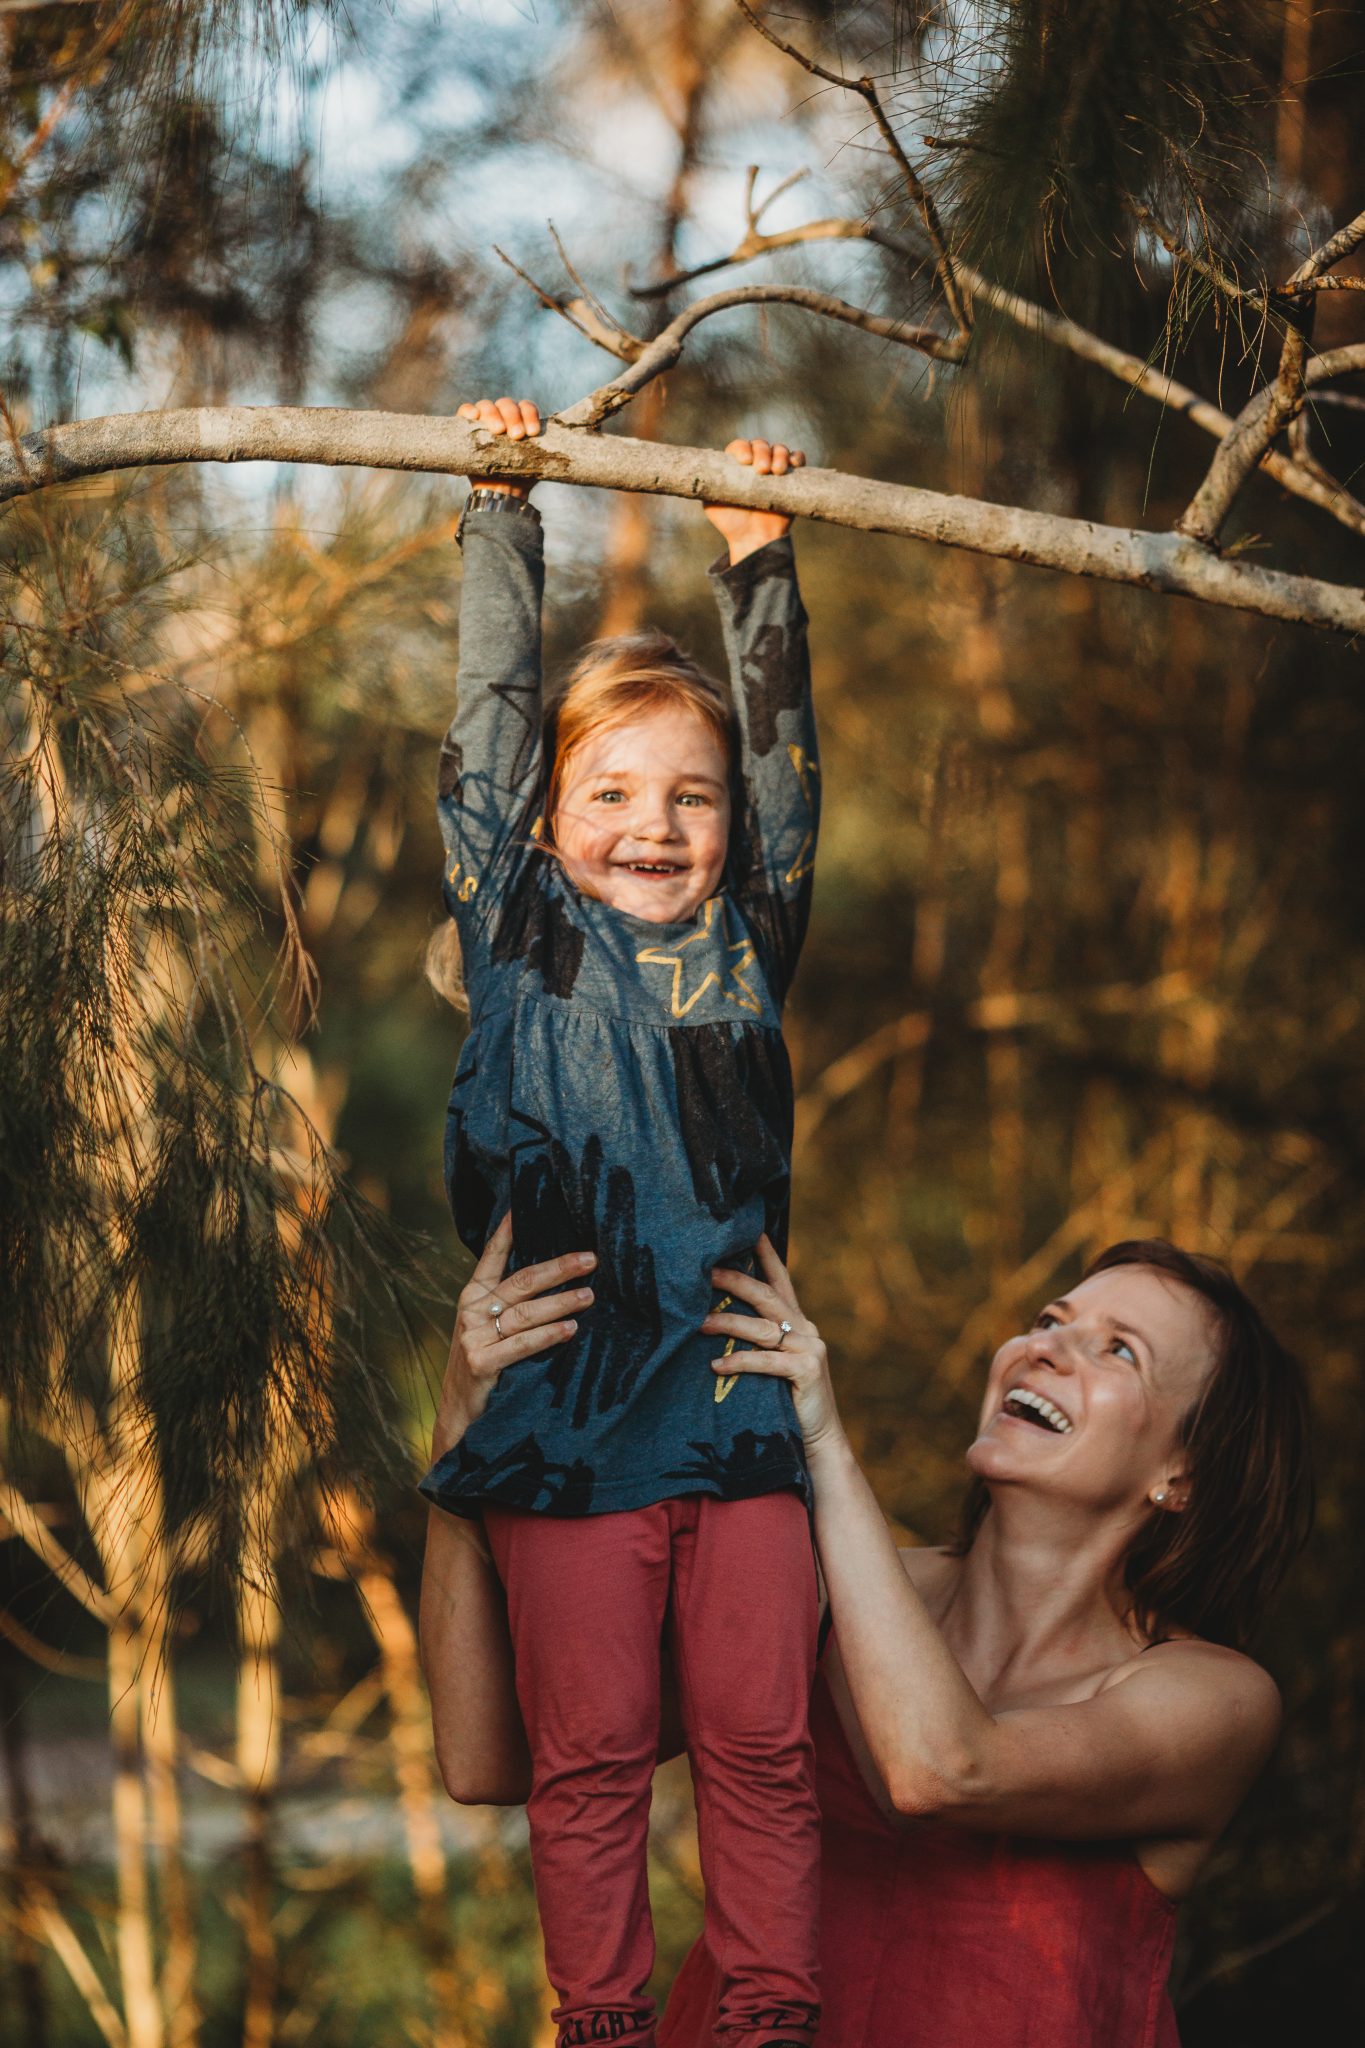 Young girl smiling, while hanging from branch as her mother supports her